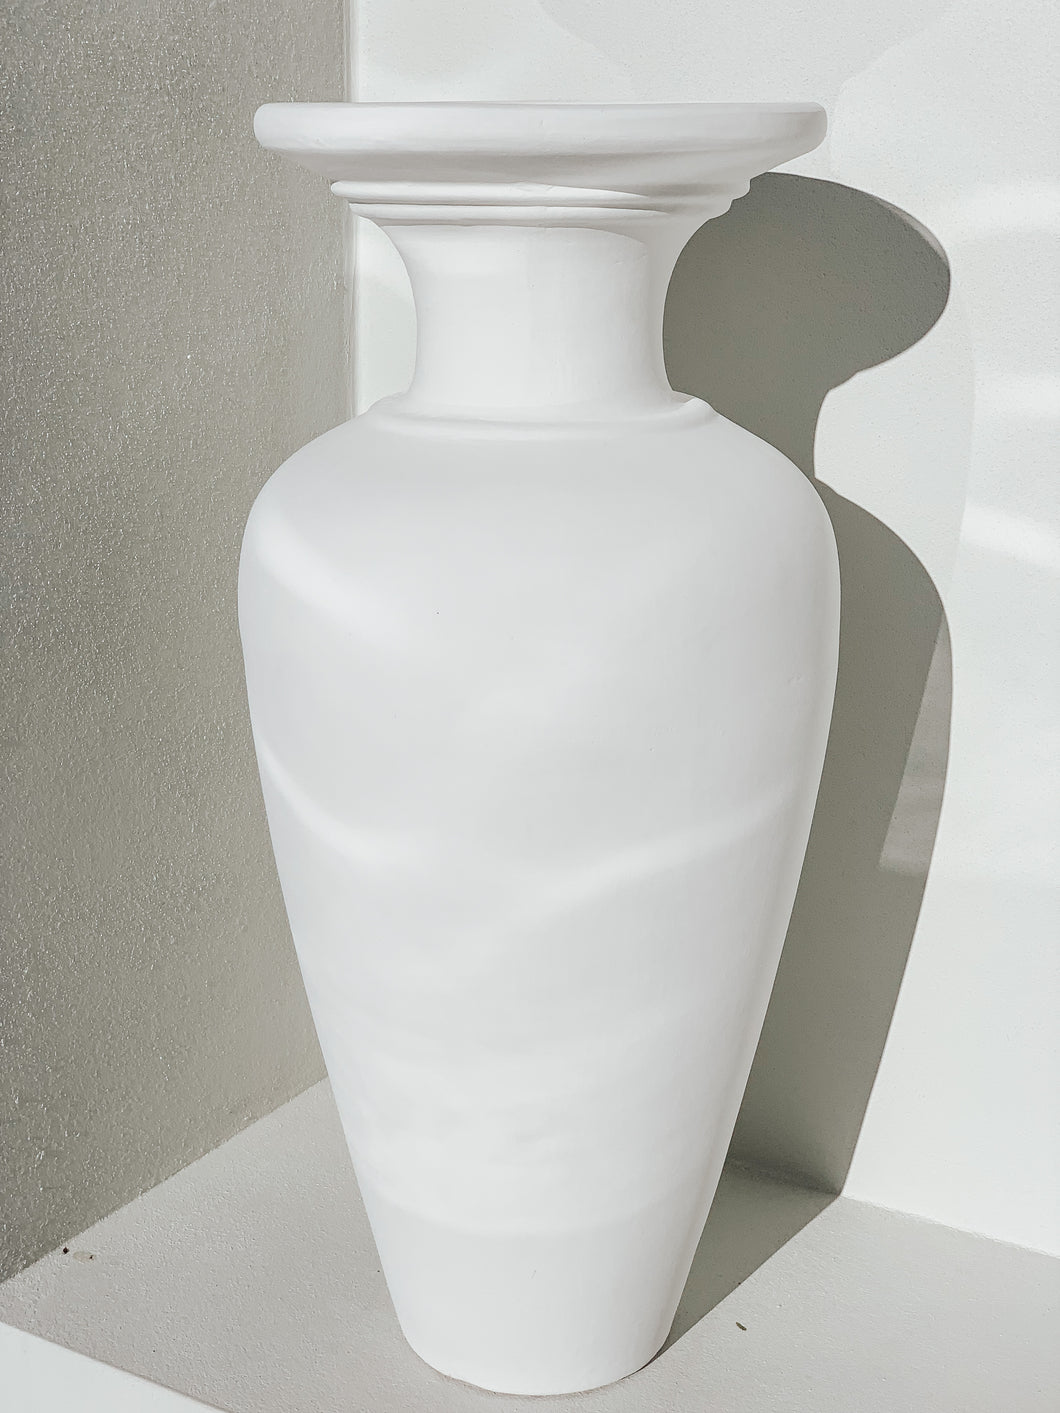 The “Sohl” Long neck urn